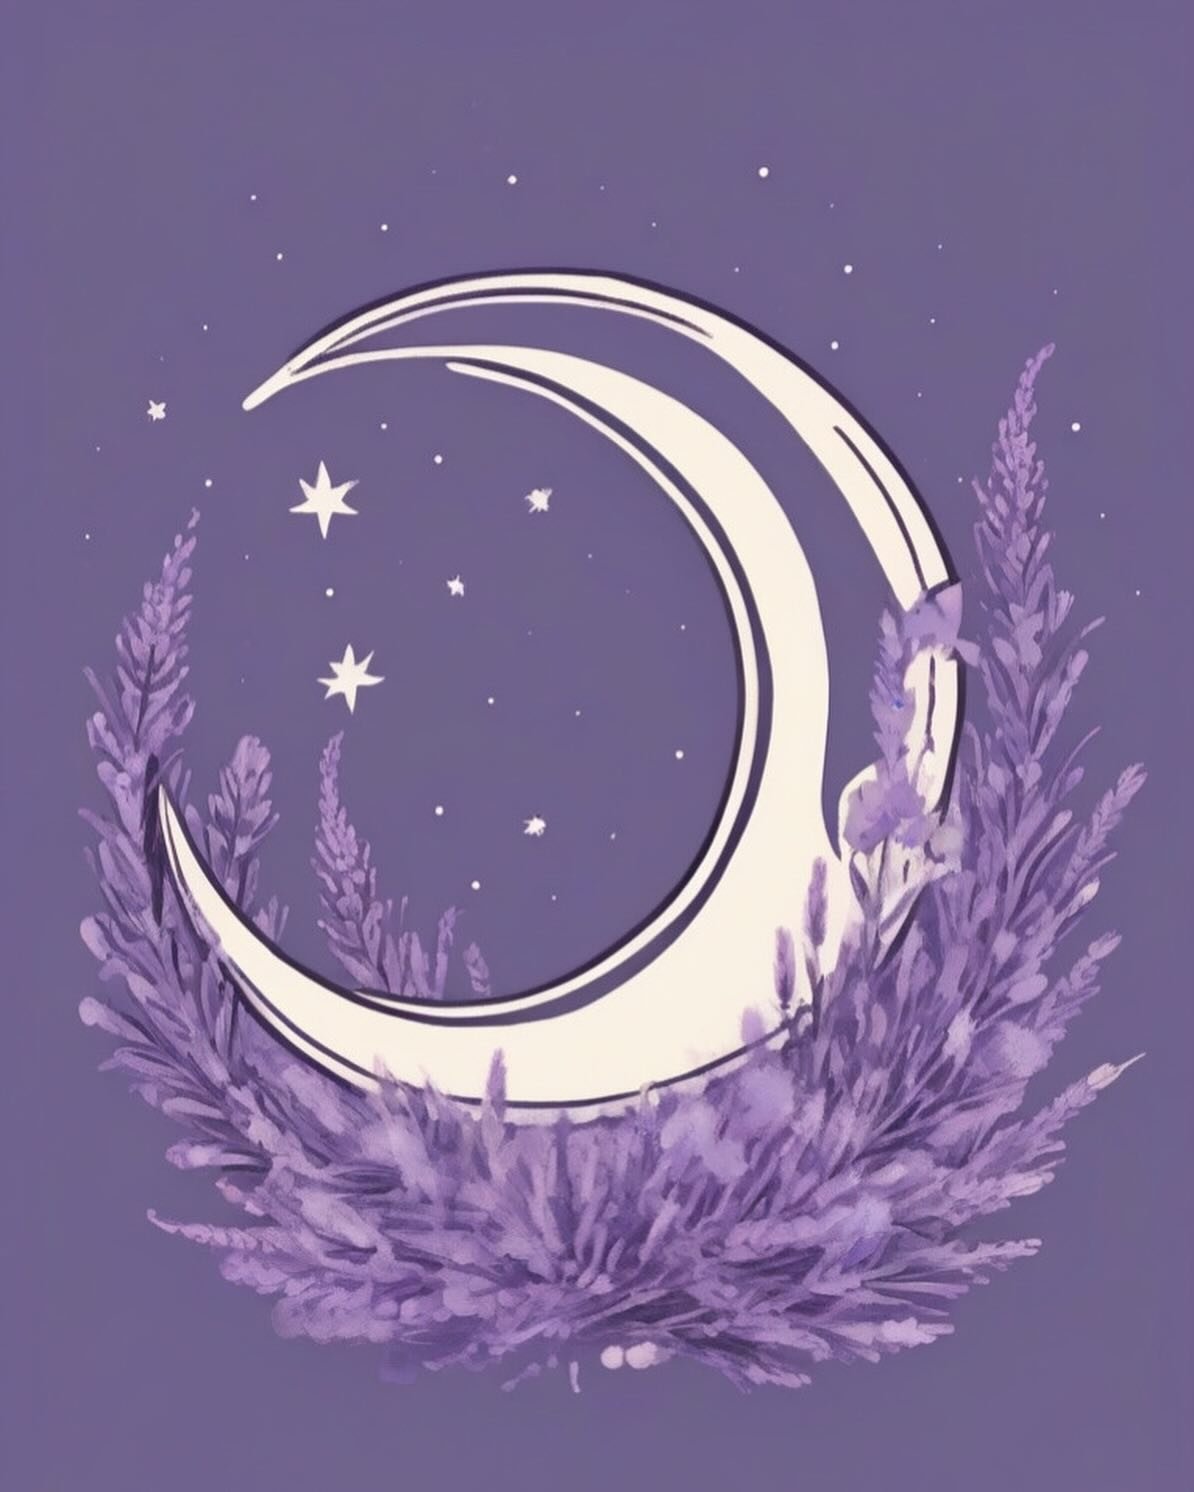 May ♡ 2024

Spring blessings with prosperity ahead 🌸

💜
☼ new month
☼ new me
☼ new energy
~
☾ old energy is clearing
☾ new energy is entering 
☾ great things are coming

🌞🌝

xo @women222wonder ☾
#womenwonder #karmic
#newmonth #monthofmay
#may #ne